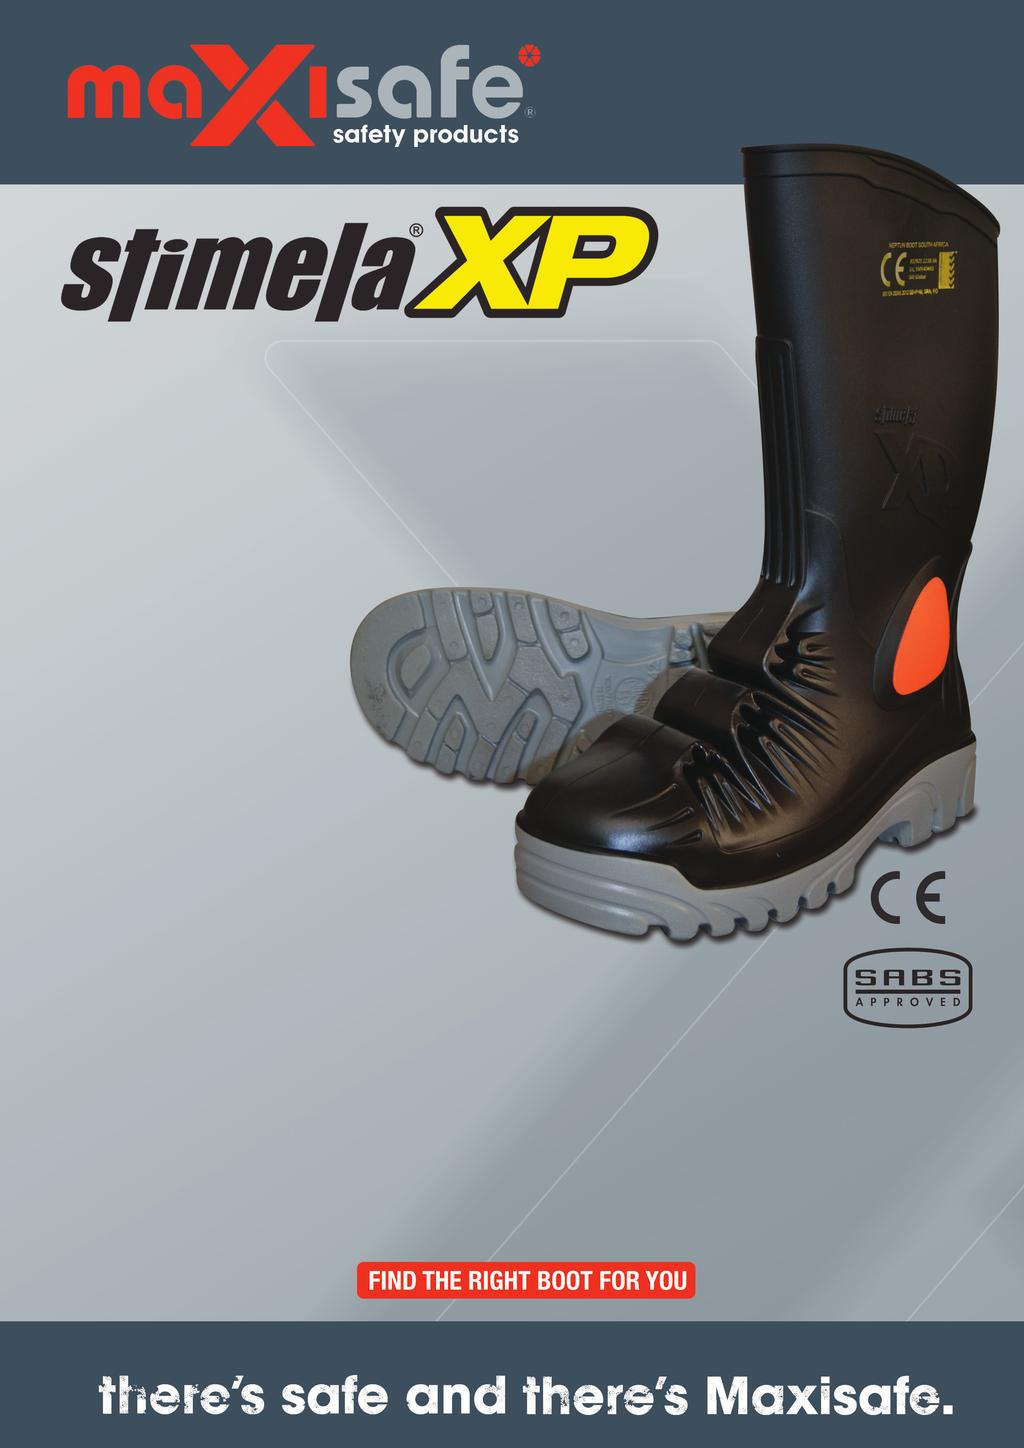 METAL FREE FULL PROTECTION GUMBOOTS Composite Toe Cap + Textile Mid Sole + Integrated Metatarsal Protection. Lightweight only weighs 2.4kg!